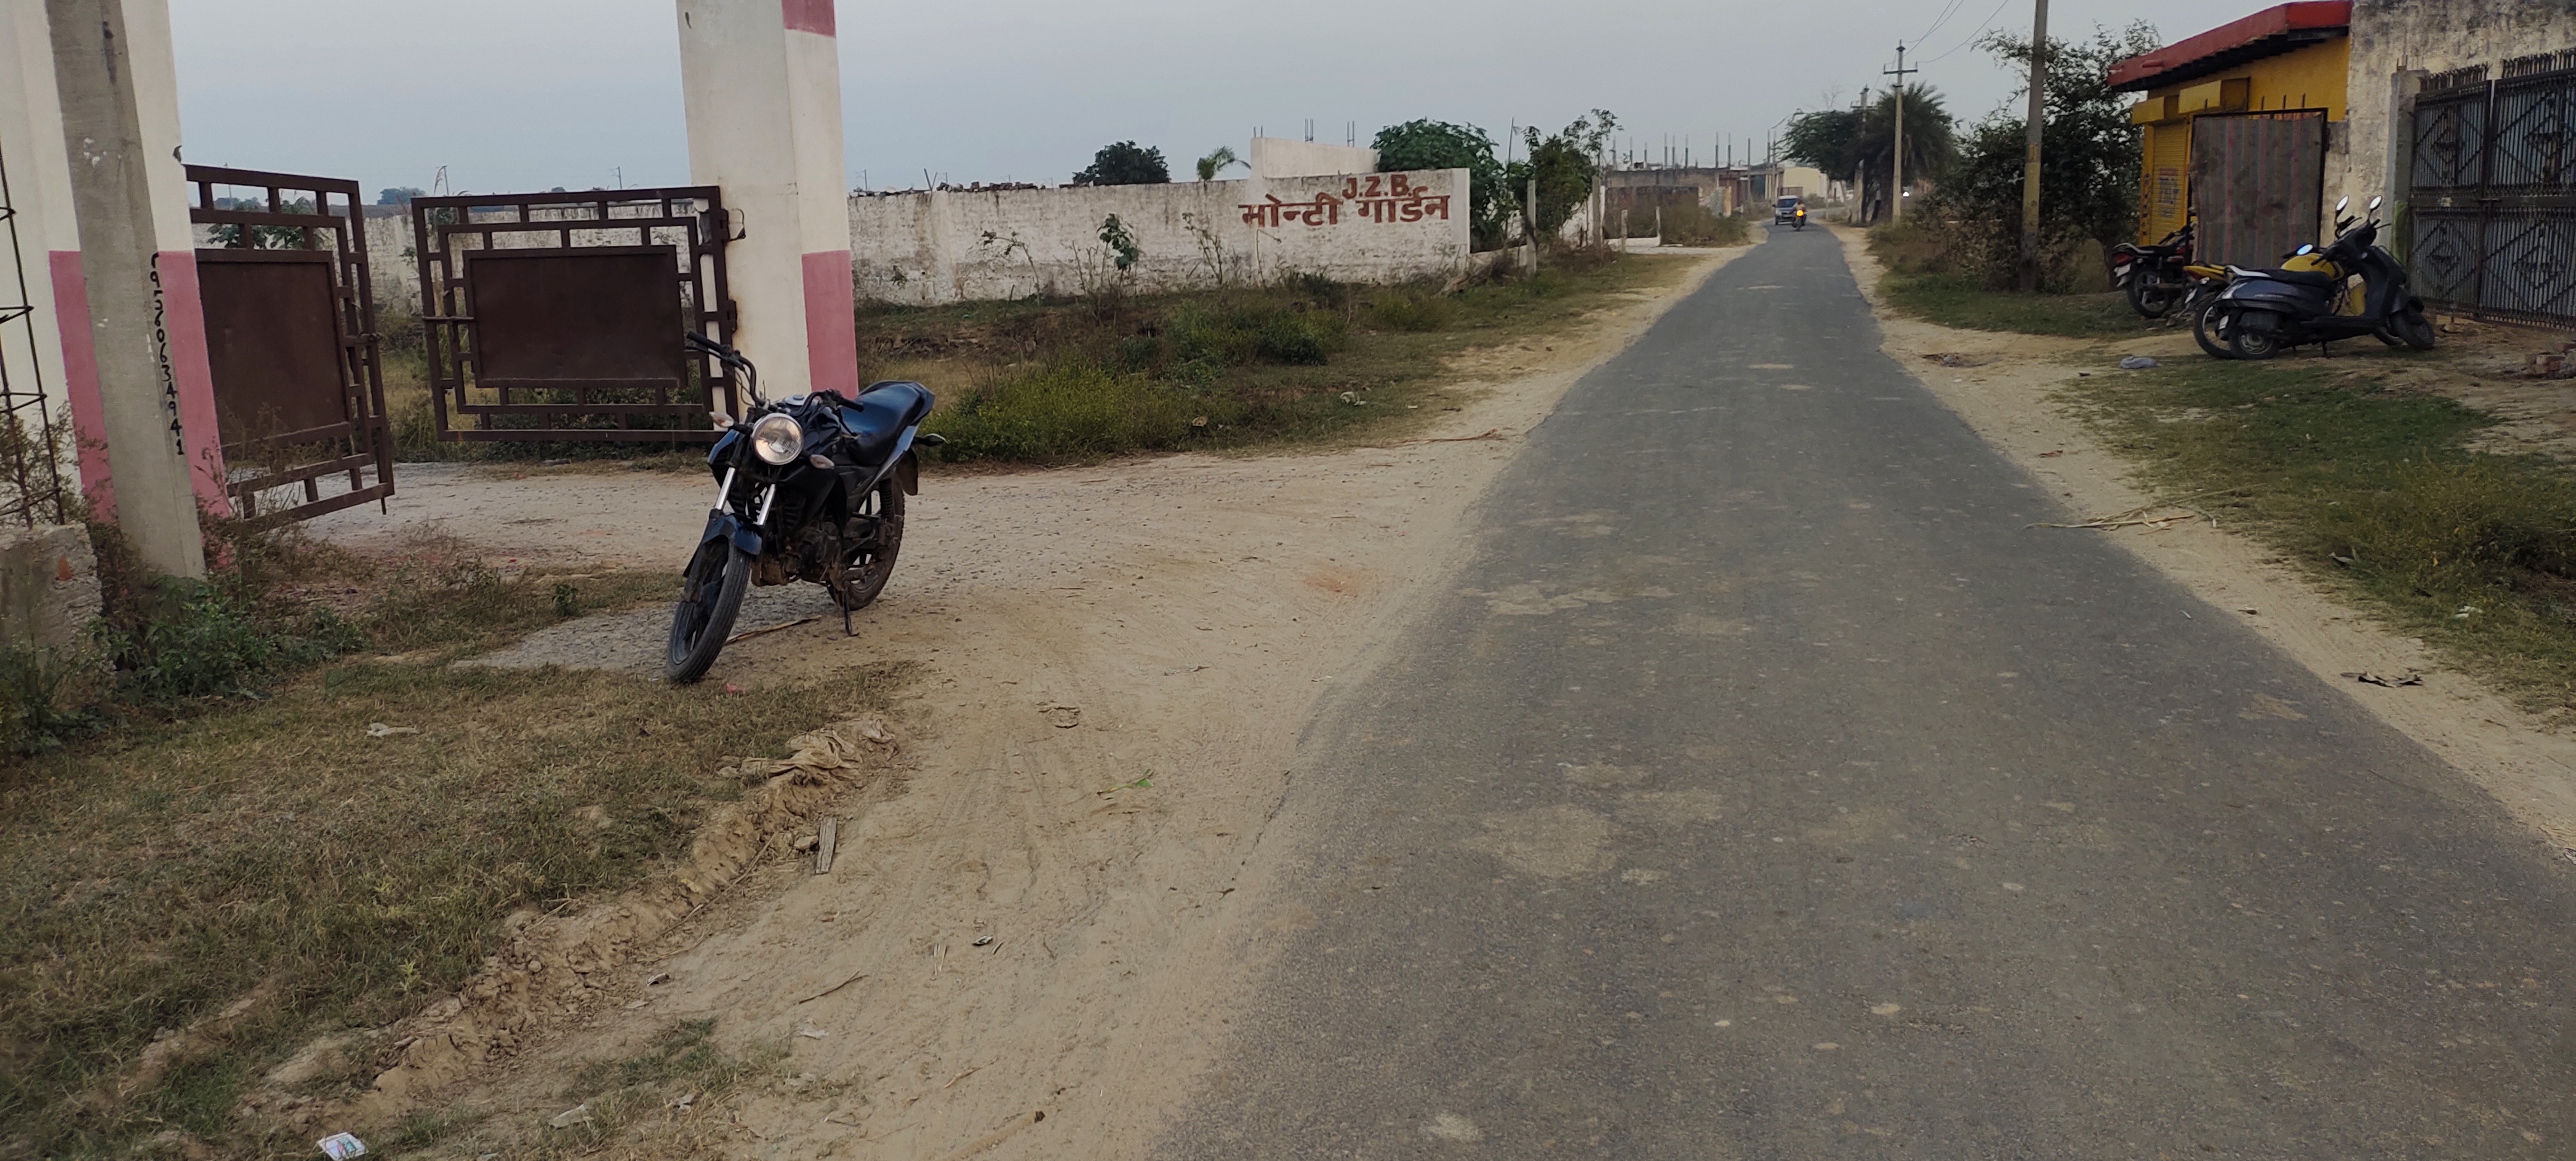 150 sq ft free hold plot for sale in greater Noida, price 15 lakh 